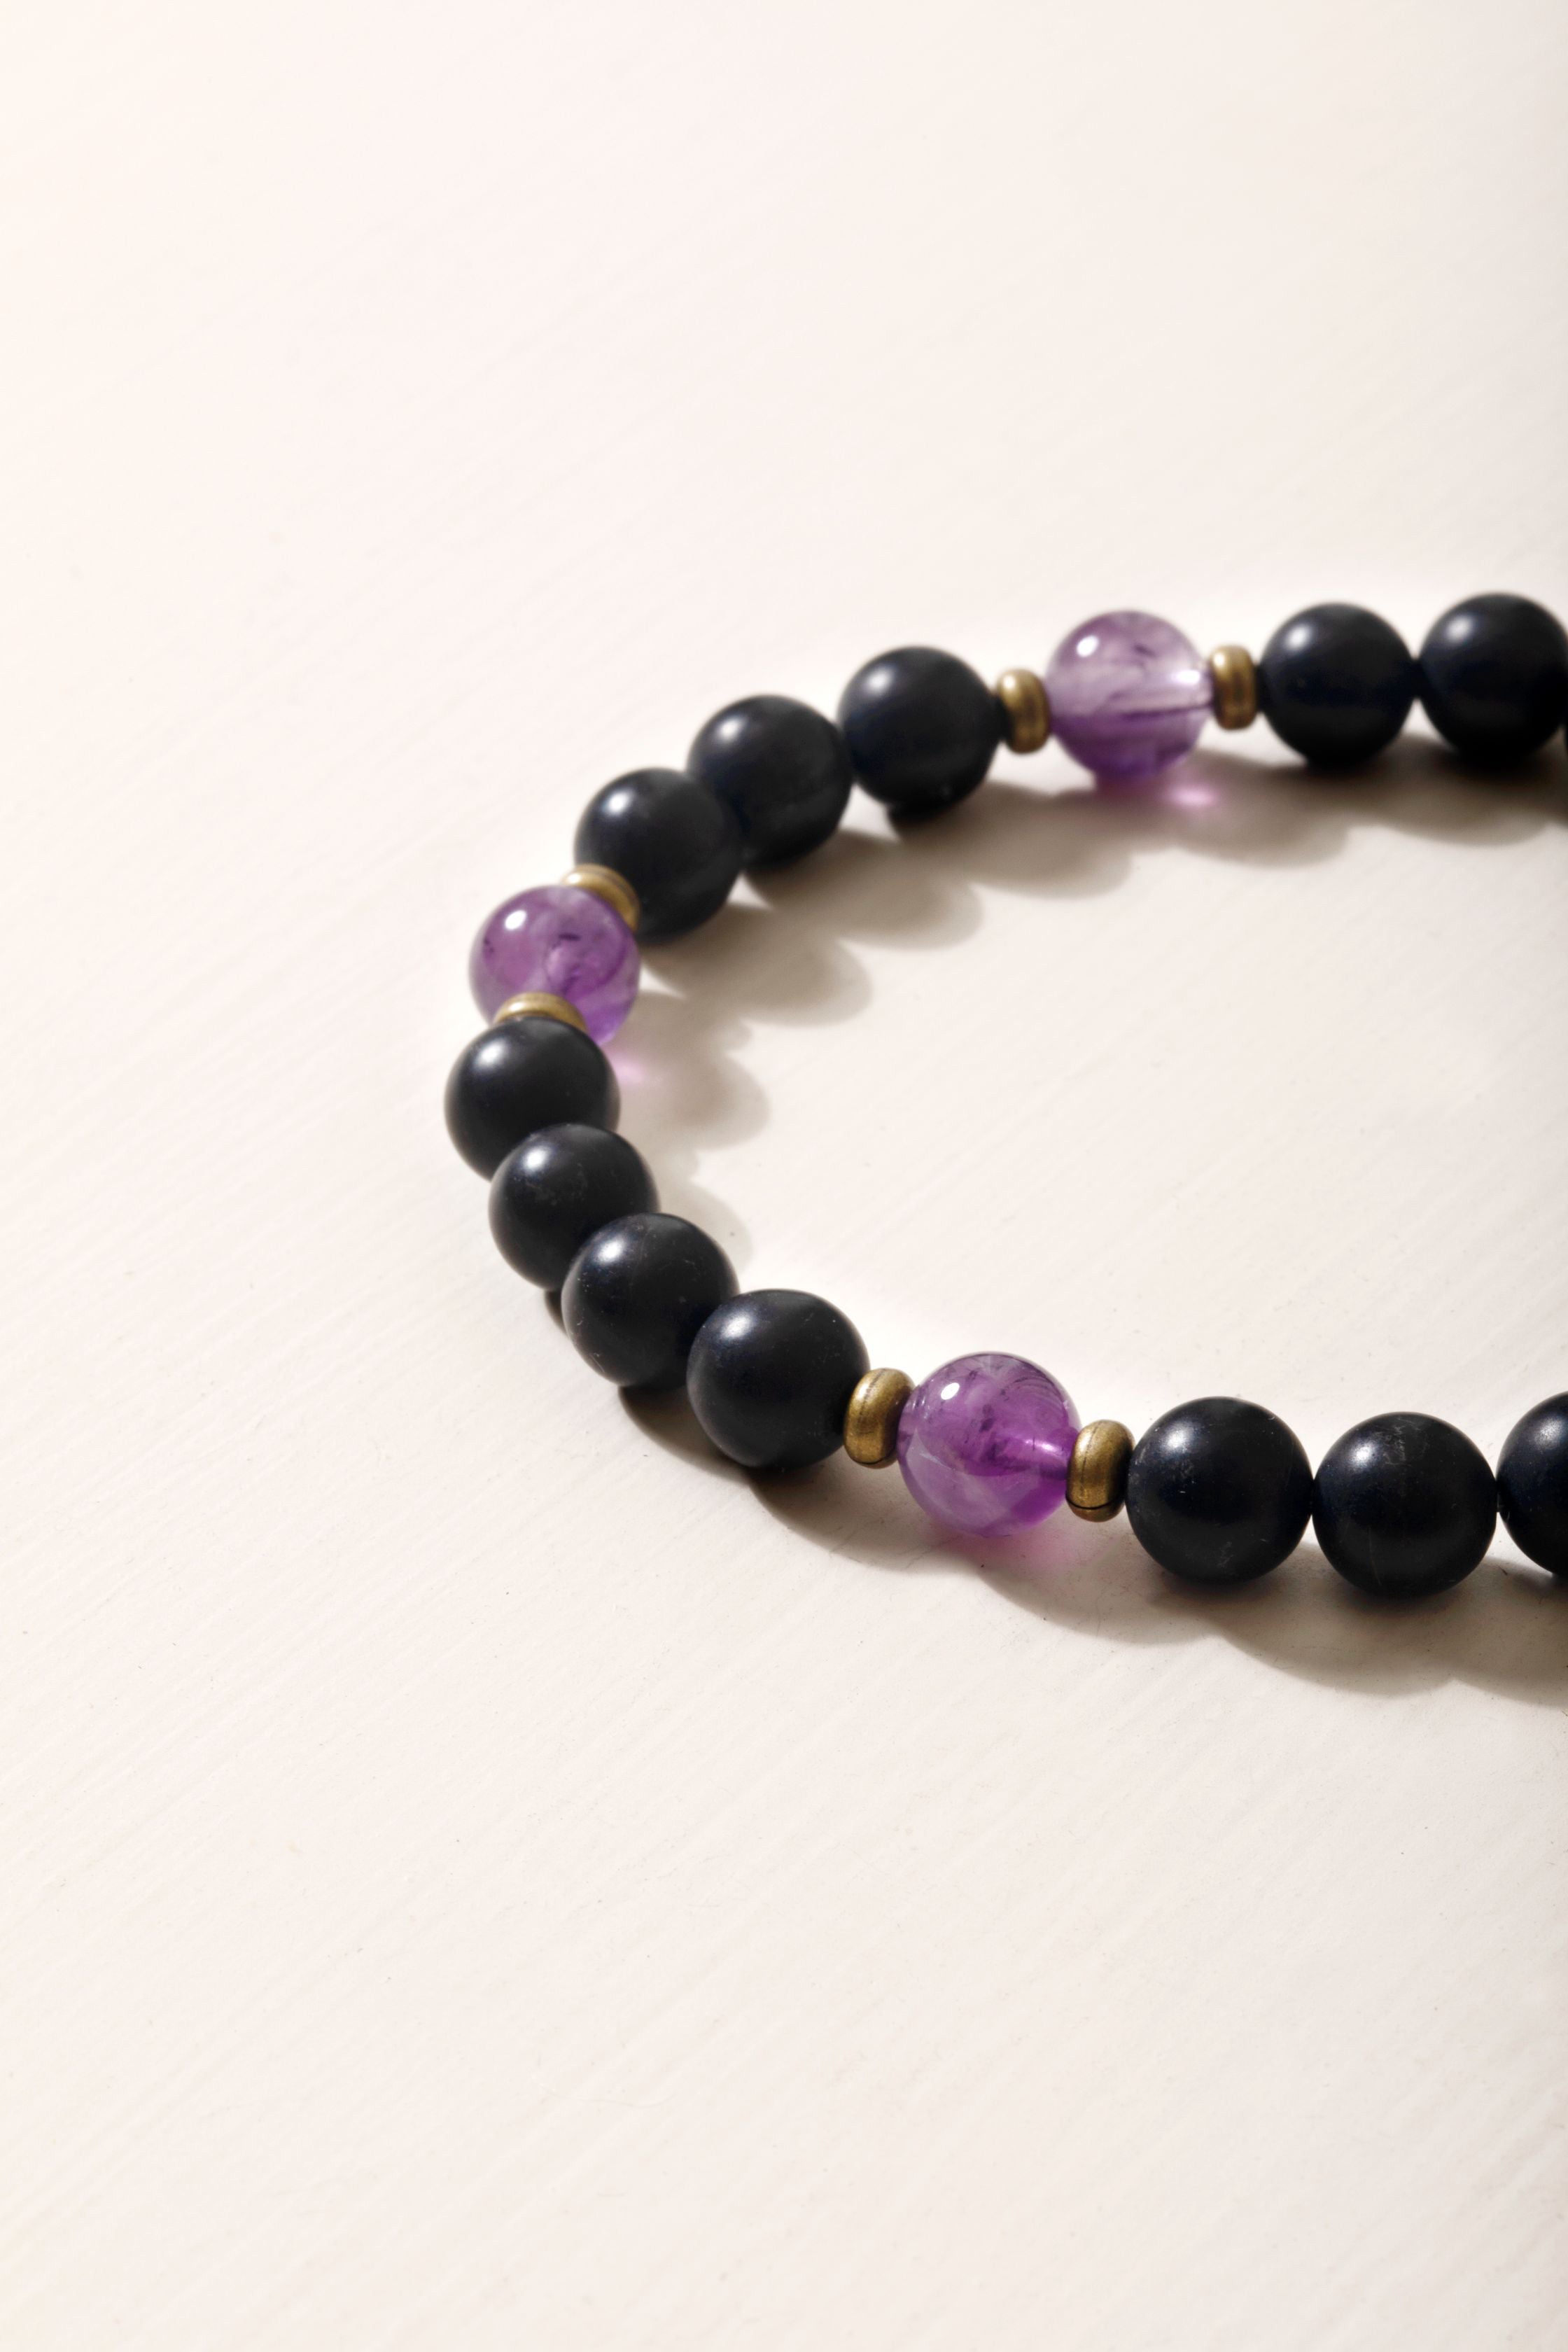 Buy JMRM Purple Amethyst 8mm Bead Round Bracelet for Unisex For Unisex  Adult at Amazon.in